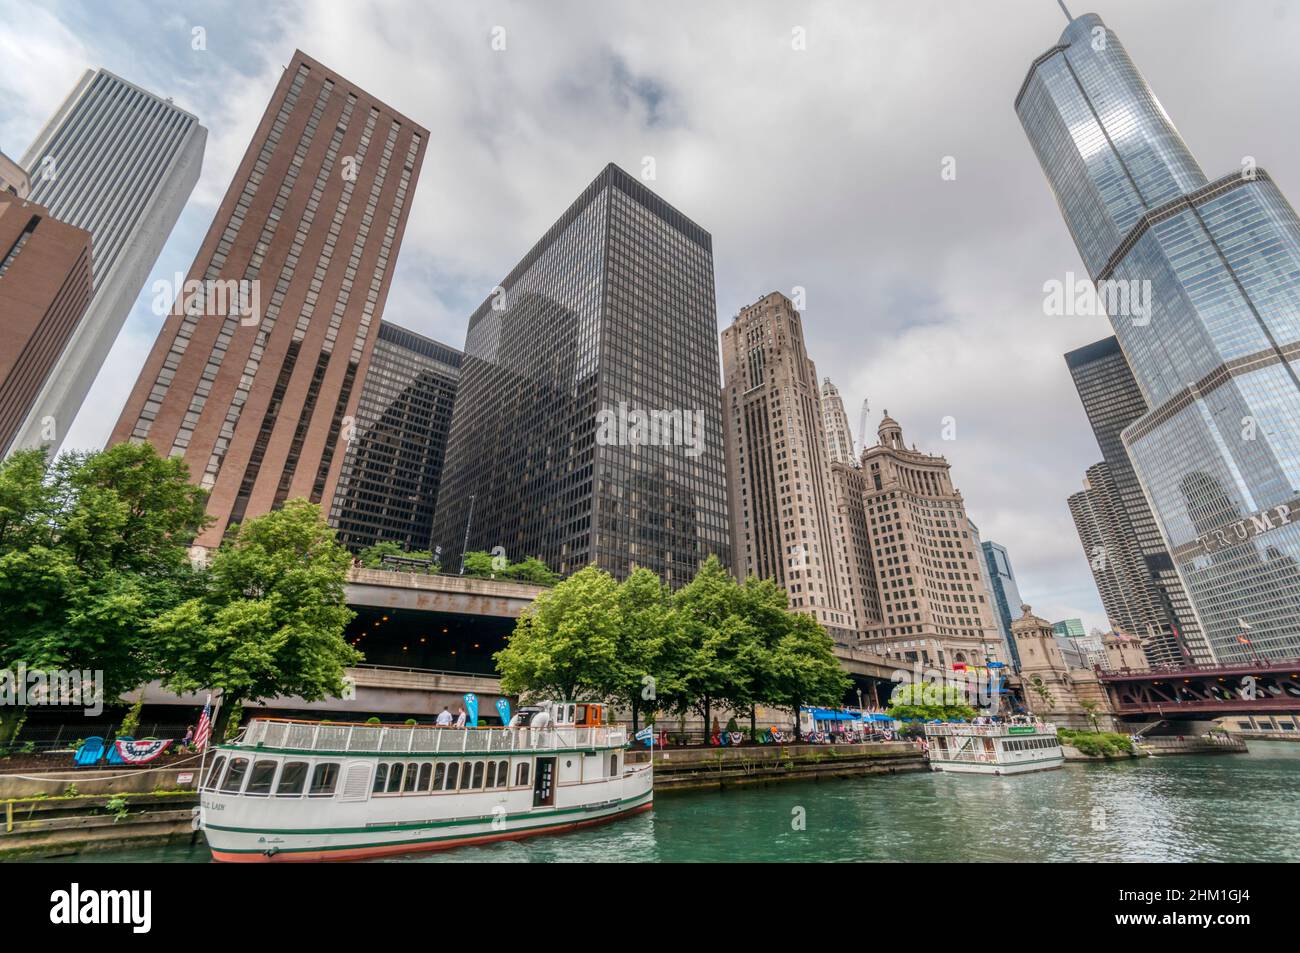 Skyscrapers along the Chicago River with the Trump Tower on the right. Stock Photo